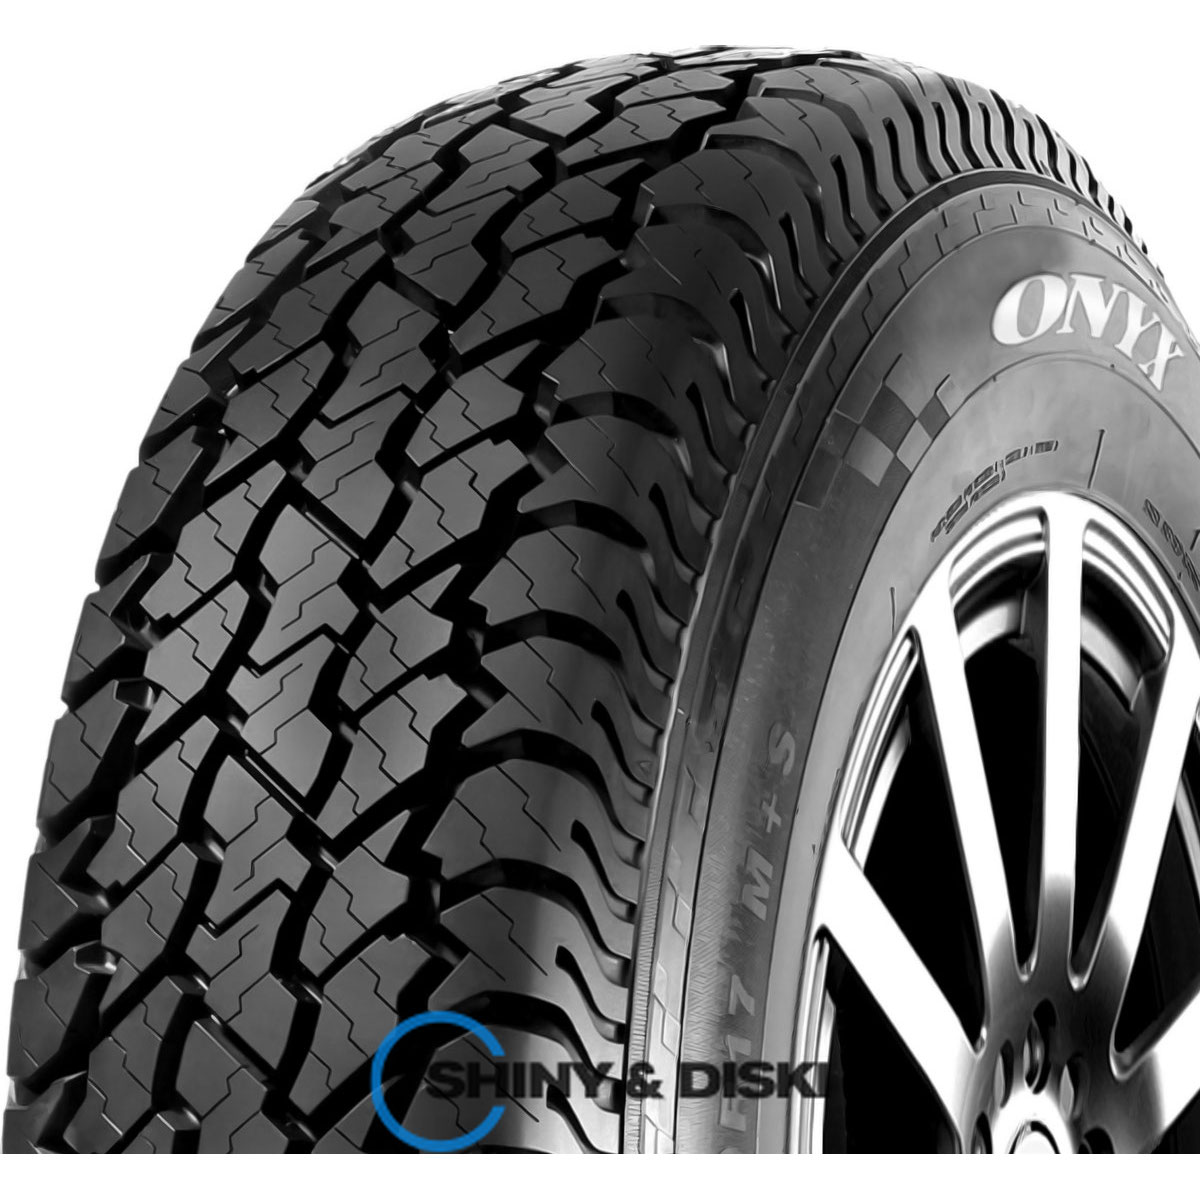 покрышки onyx ny-at187 31/10.5 r15 109r